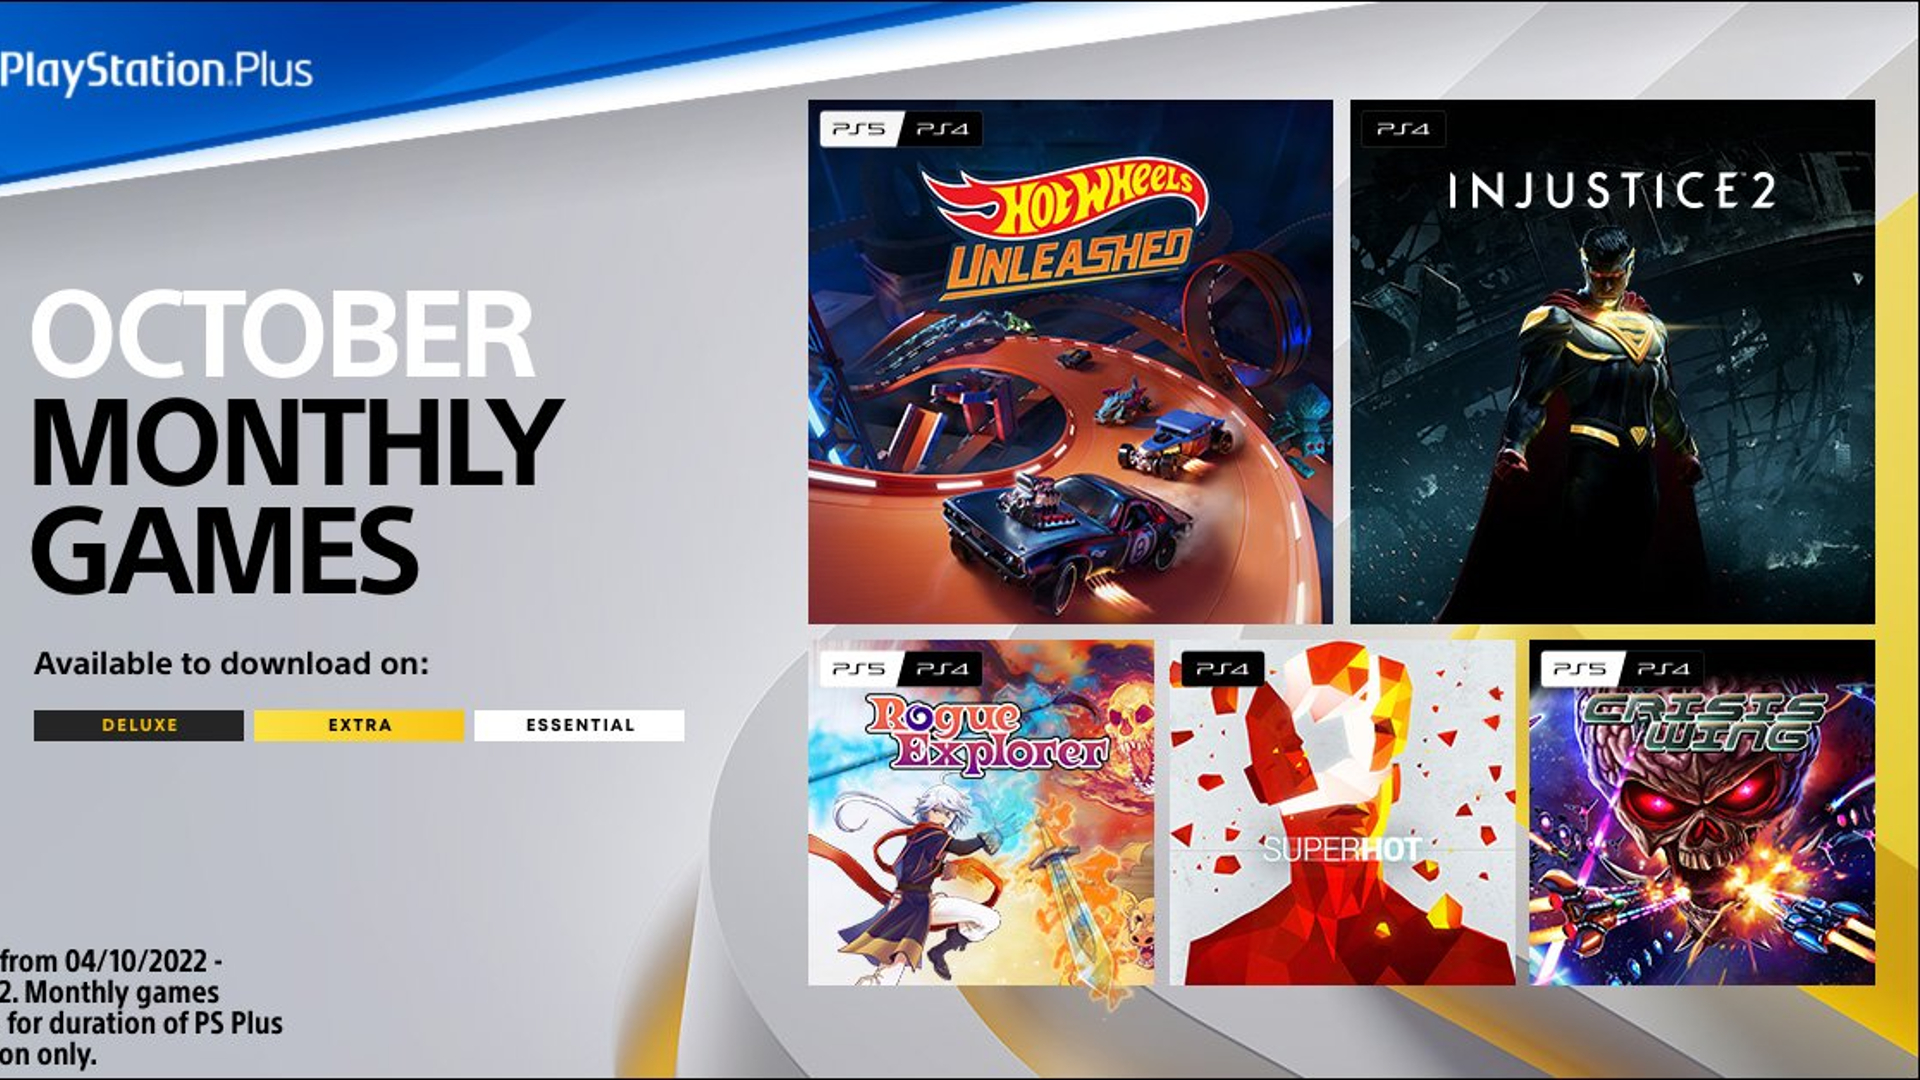 PS Plus October 2022 Adds Injustice 2, Hot Wheels Unleashed & More